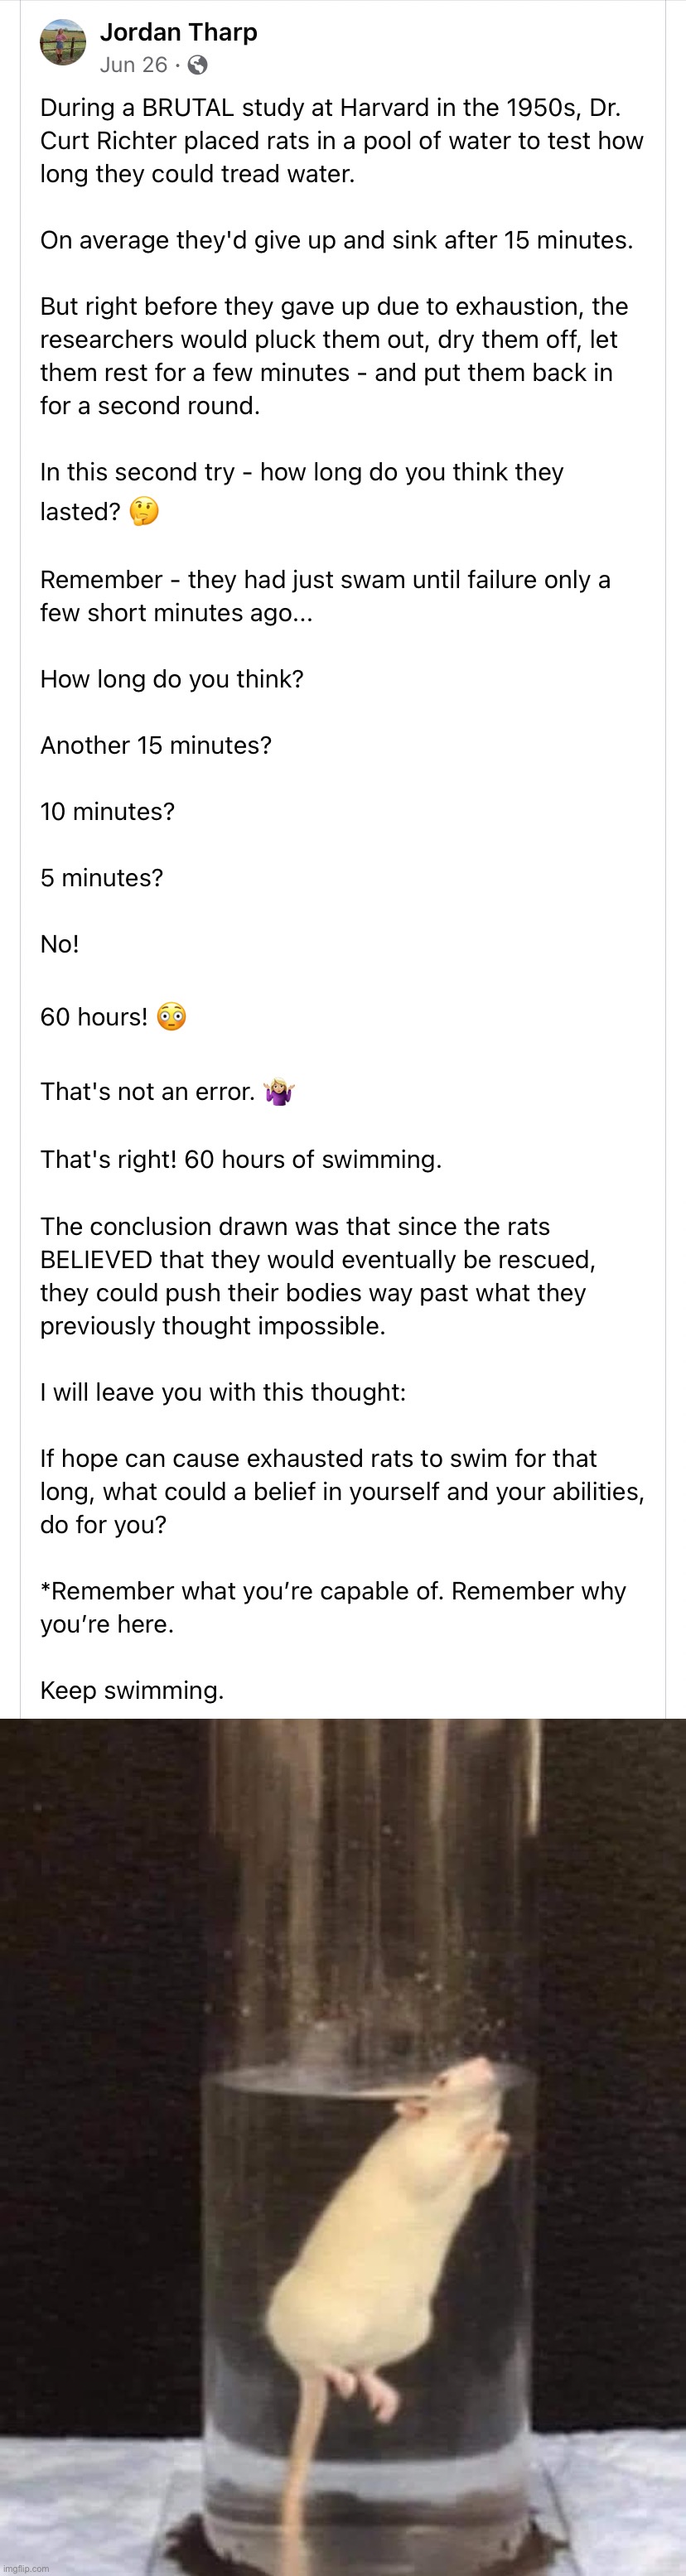 You’re stronger than you think you are. Just keep swimming! | image tagged in rat in water,swimming,just keep swimming,repost,rats,experiment | made w/ Imgflip meme maker